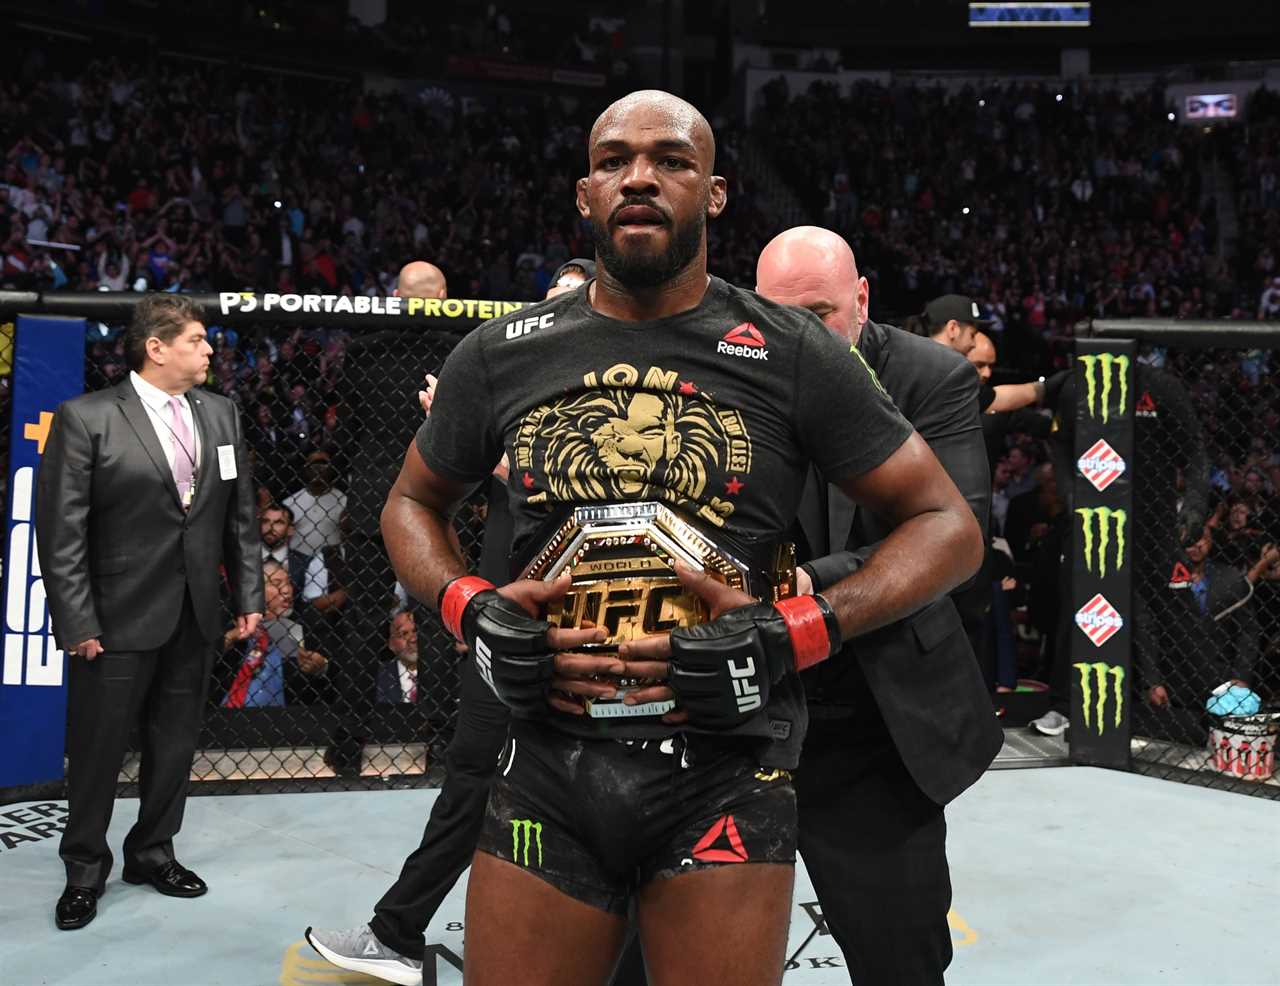 Jon Jones, the UFC legend, has been confirmed by Dana White. He will face Francis Ngannou or Stipe Miocic at heavyweight